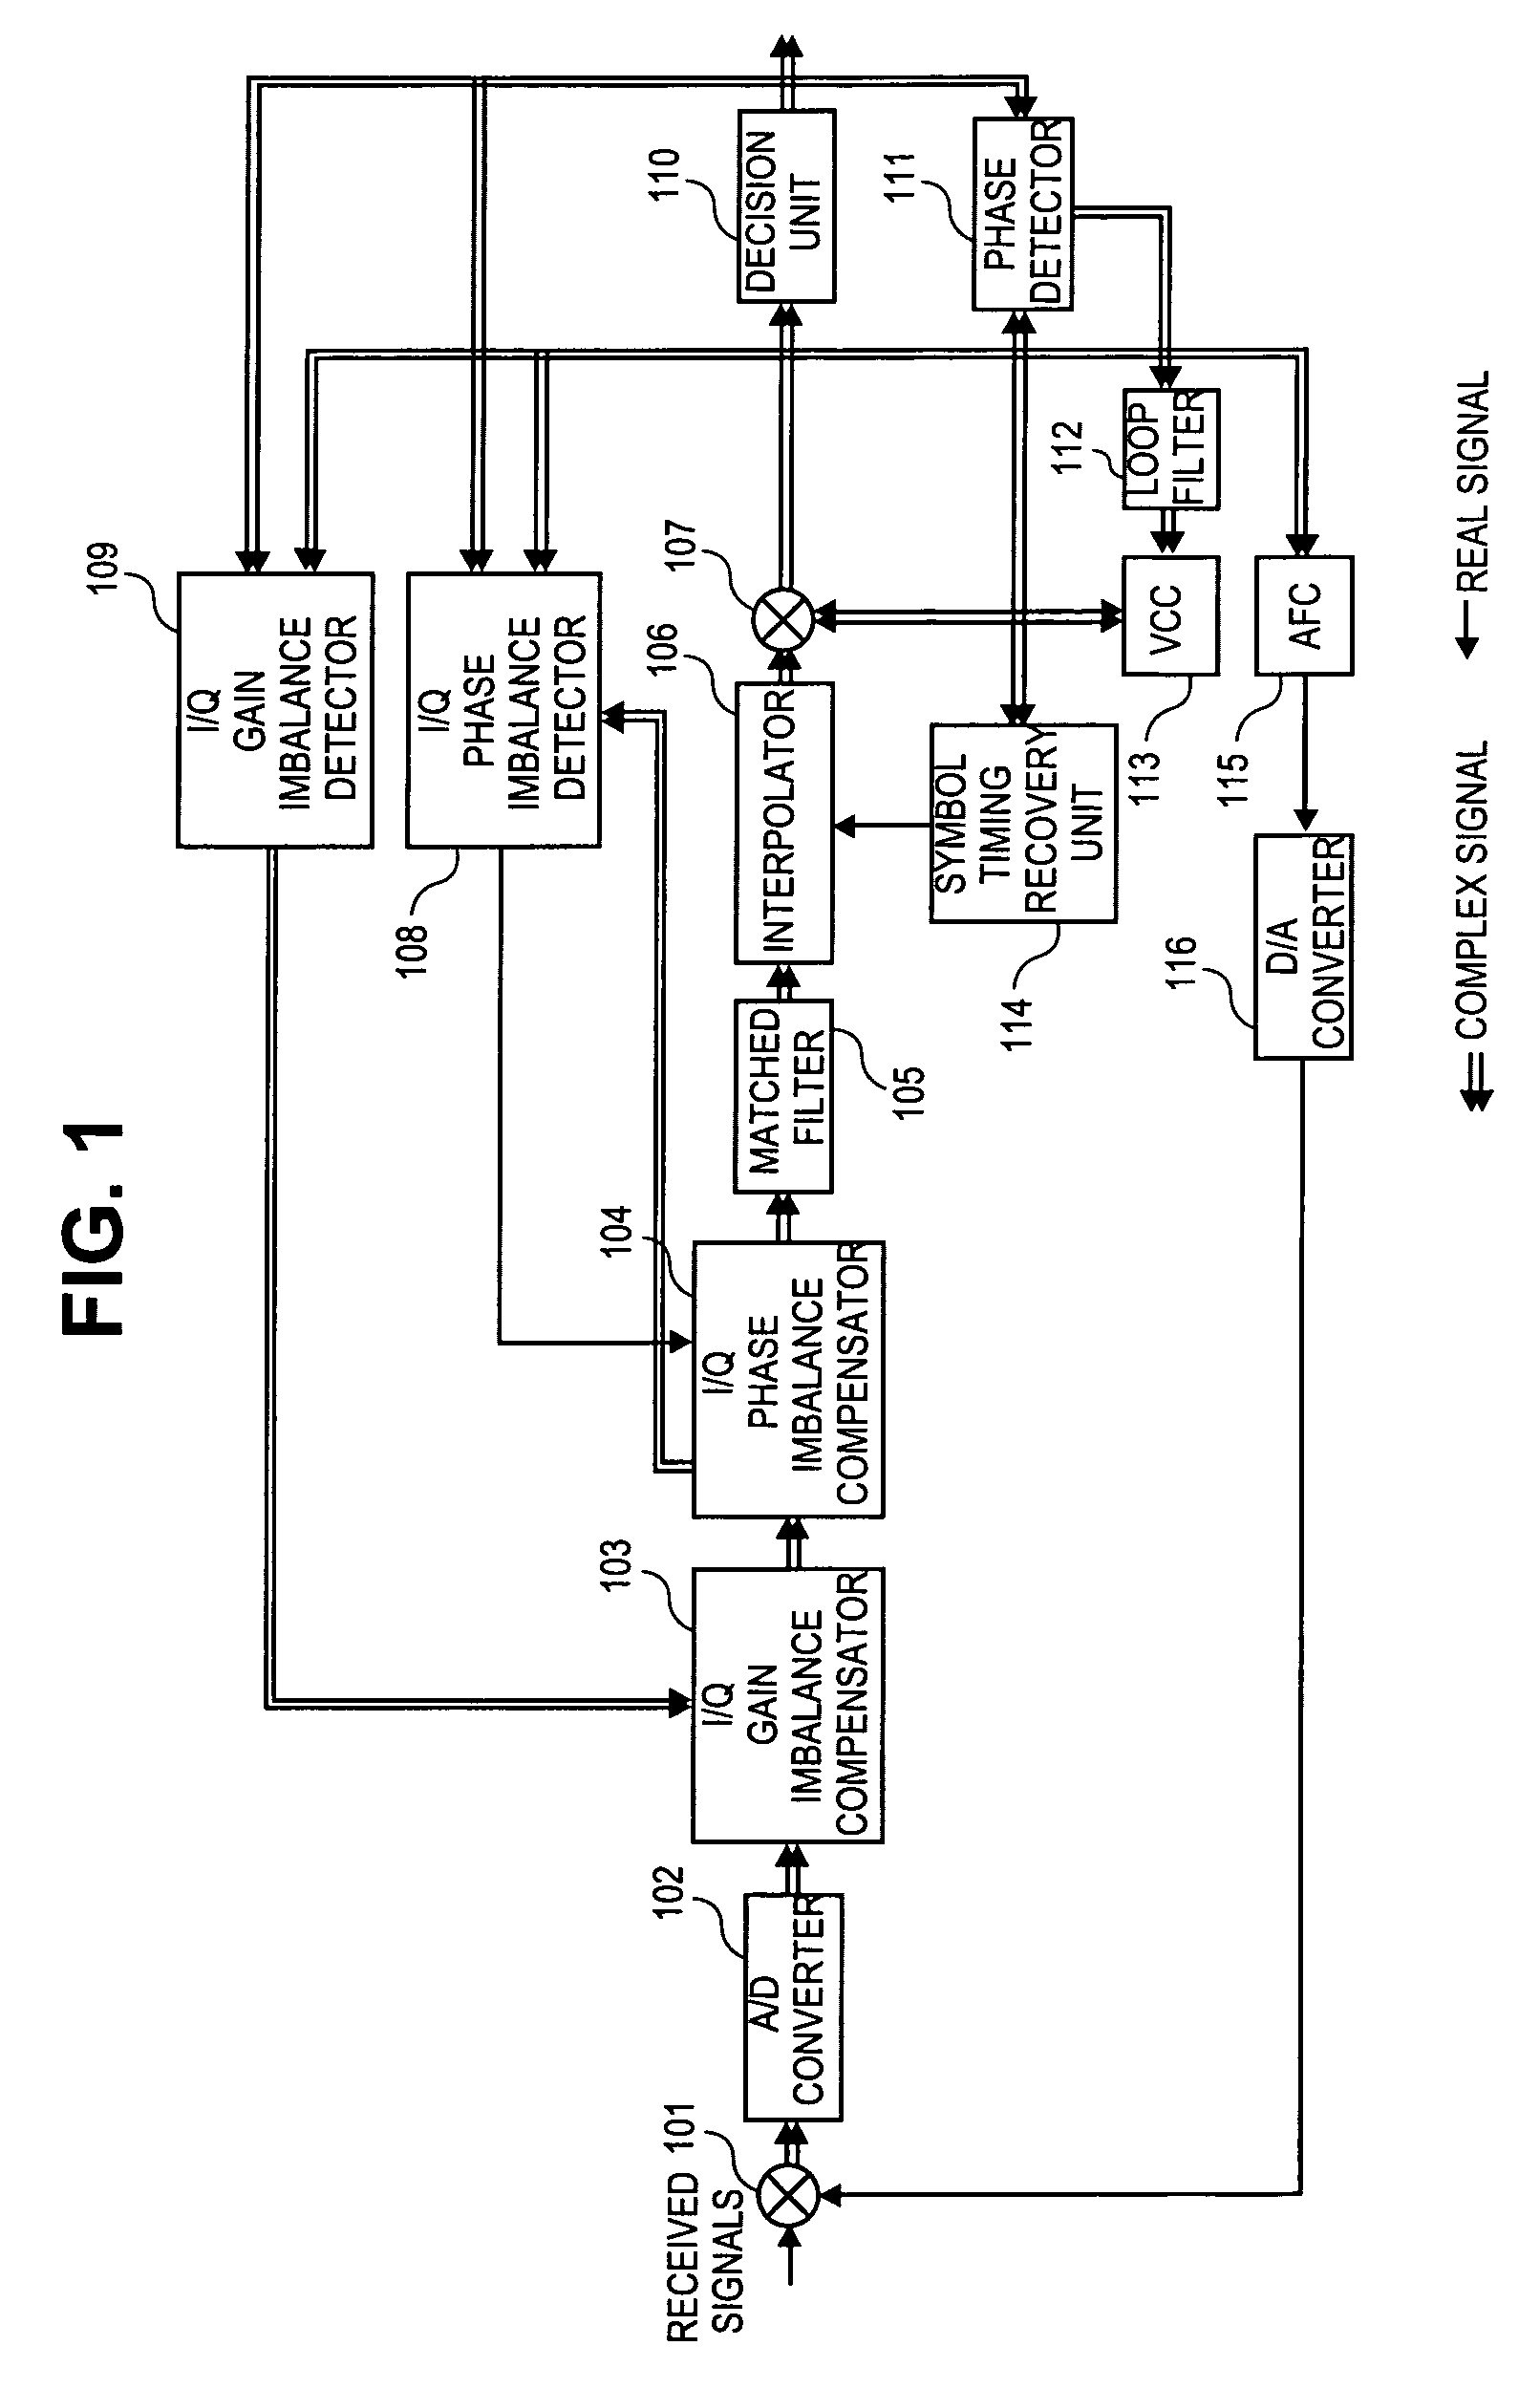 Quadrature demodulator for compensating for gain and phase imbalances between in-phase and quadrature-phase components